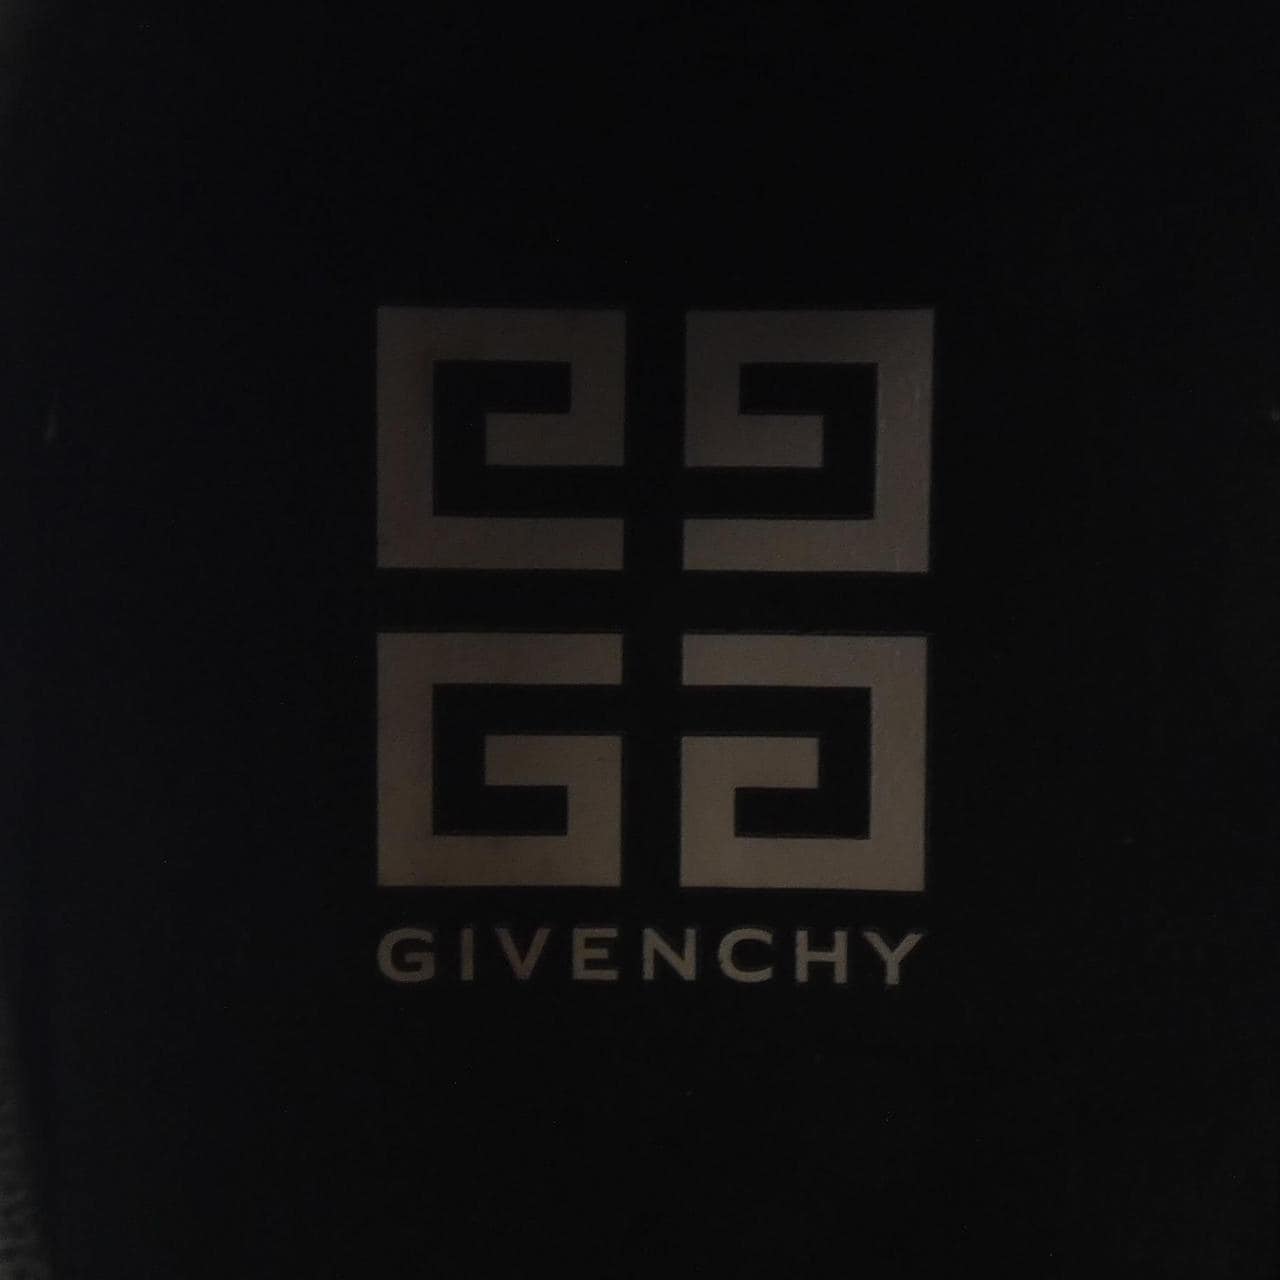 GIVENCHY运动鞋